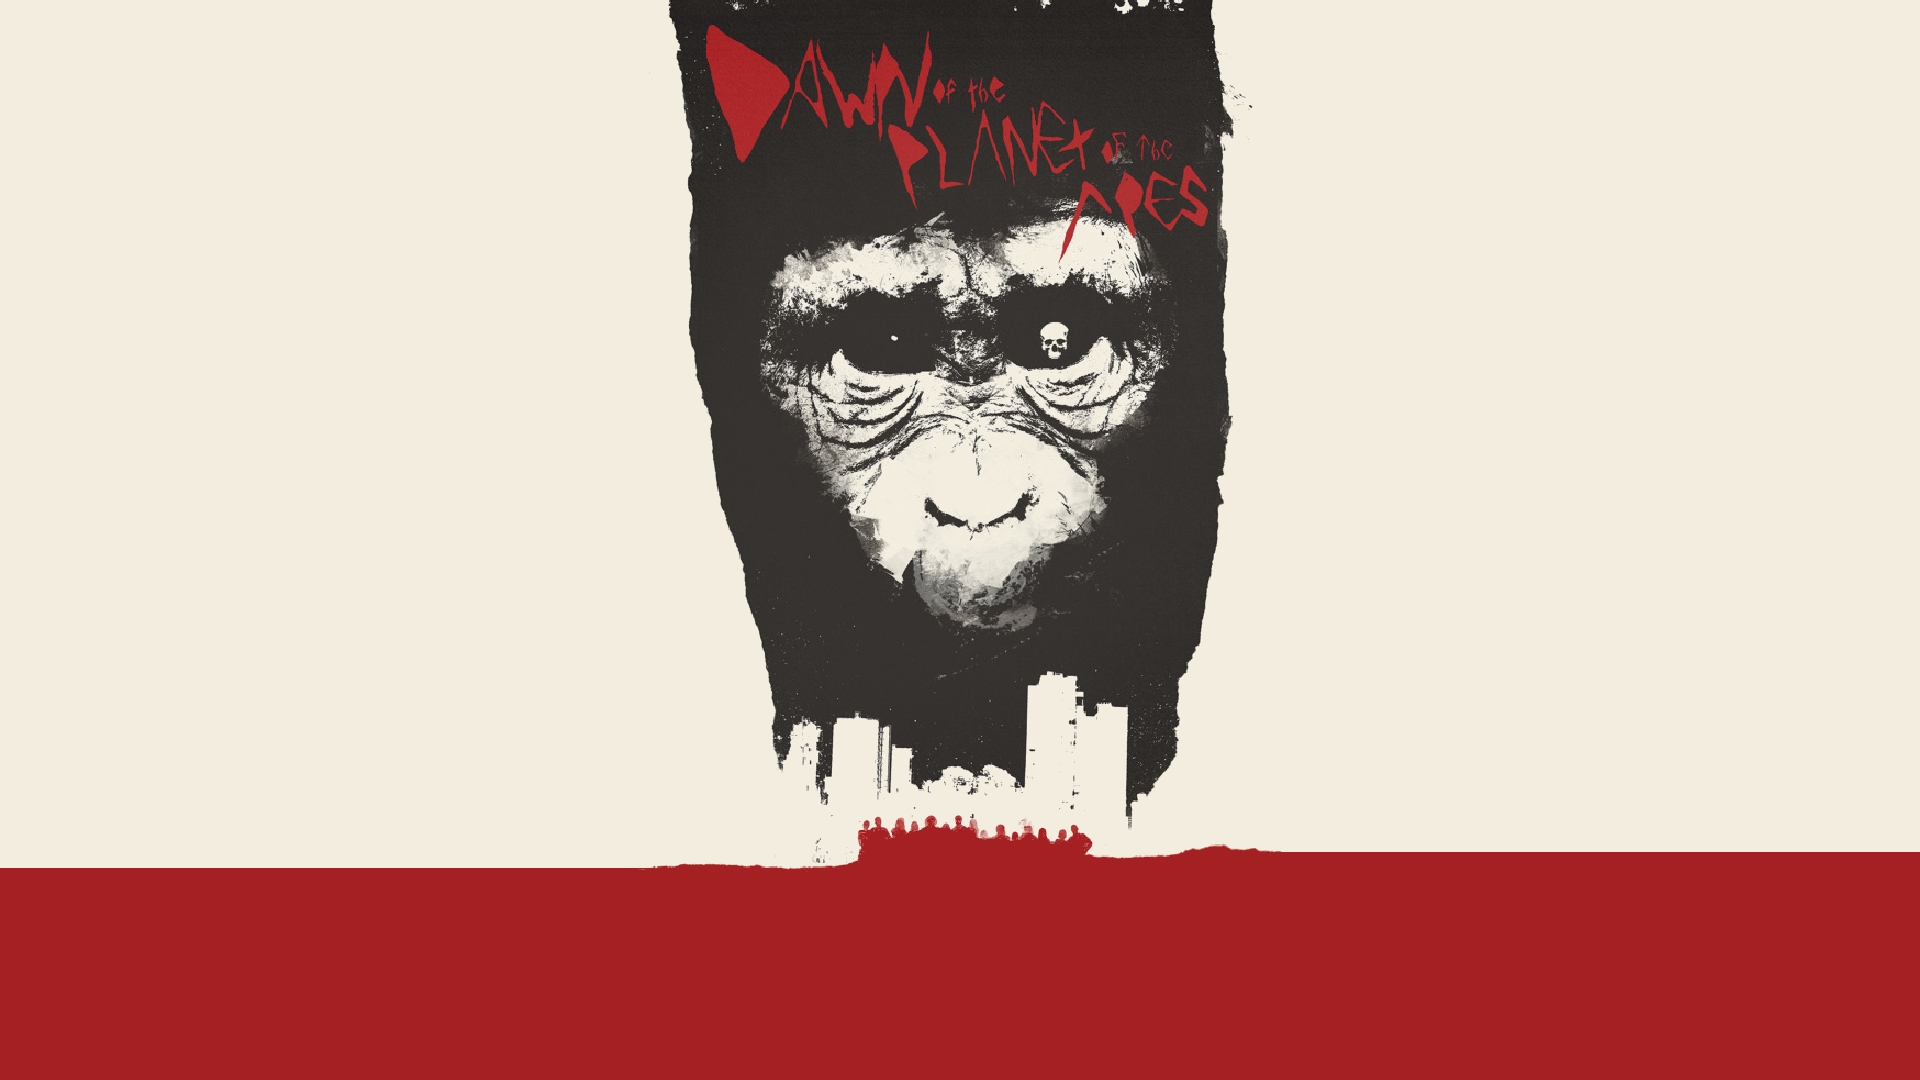 Planet Of The Apes 1920x1080